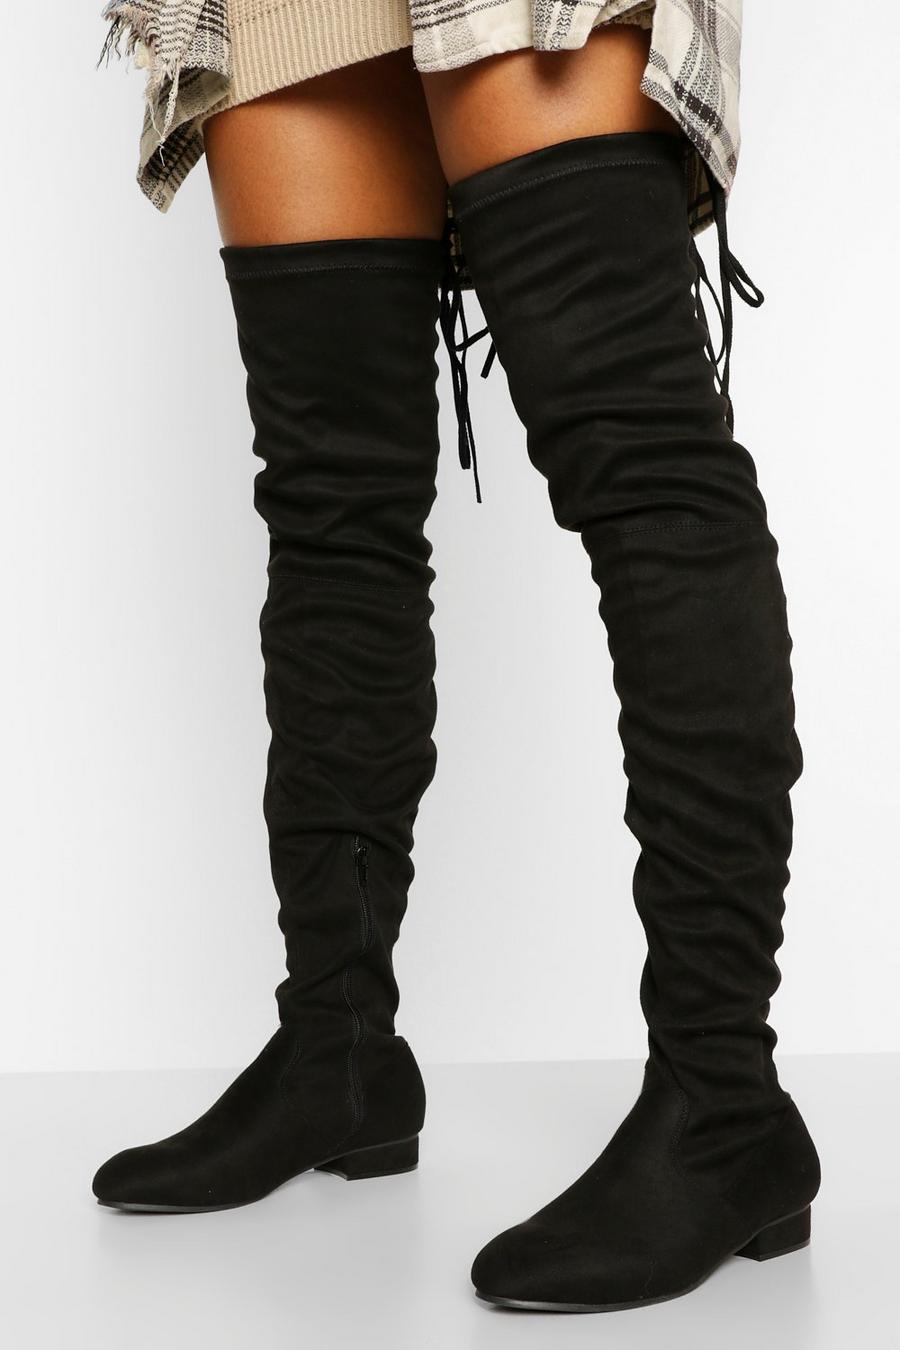 Black Wider Calf Over The Knee Boots